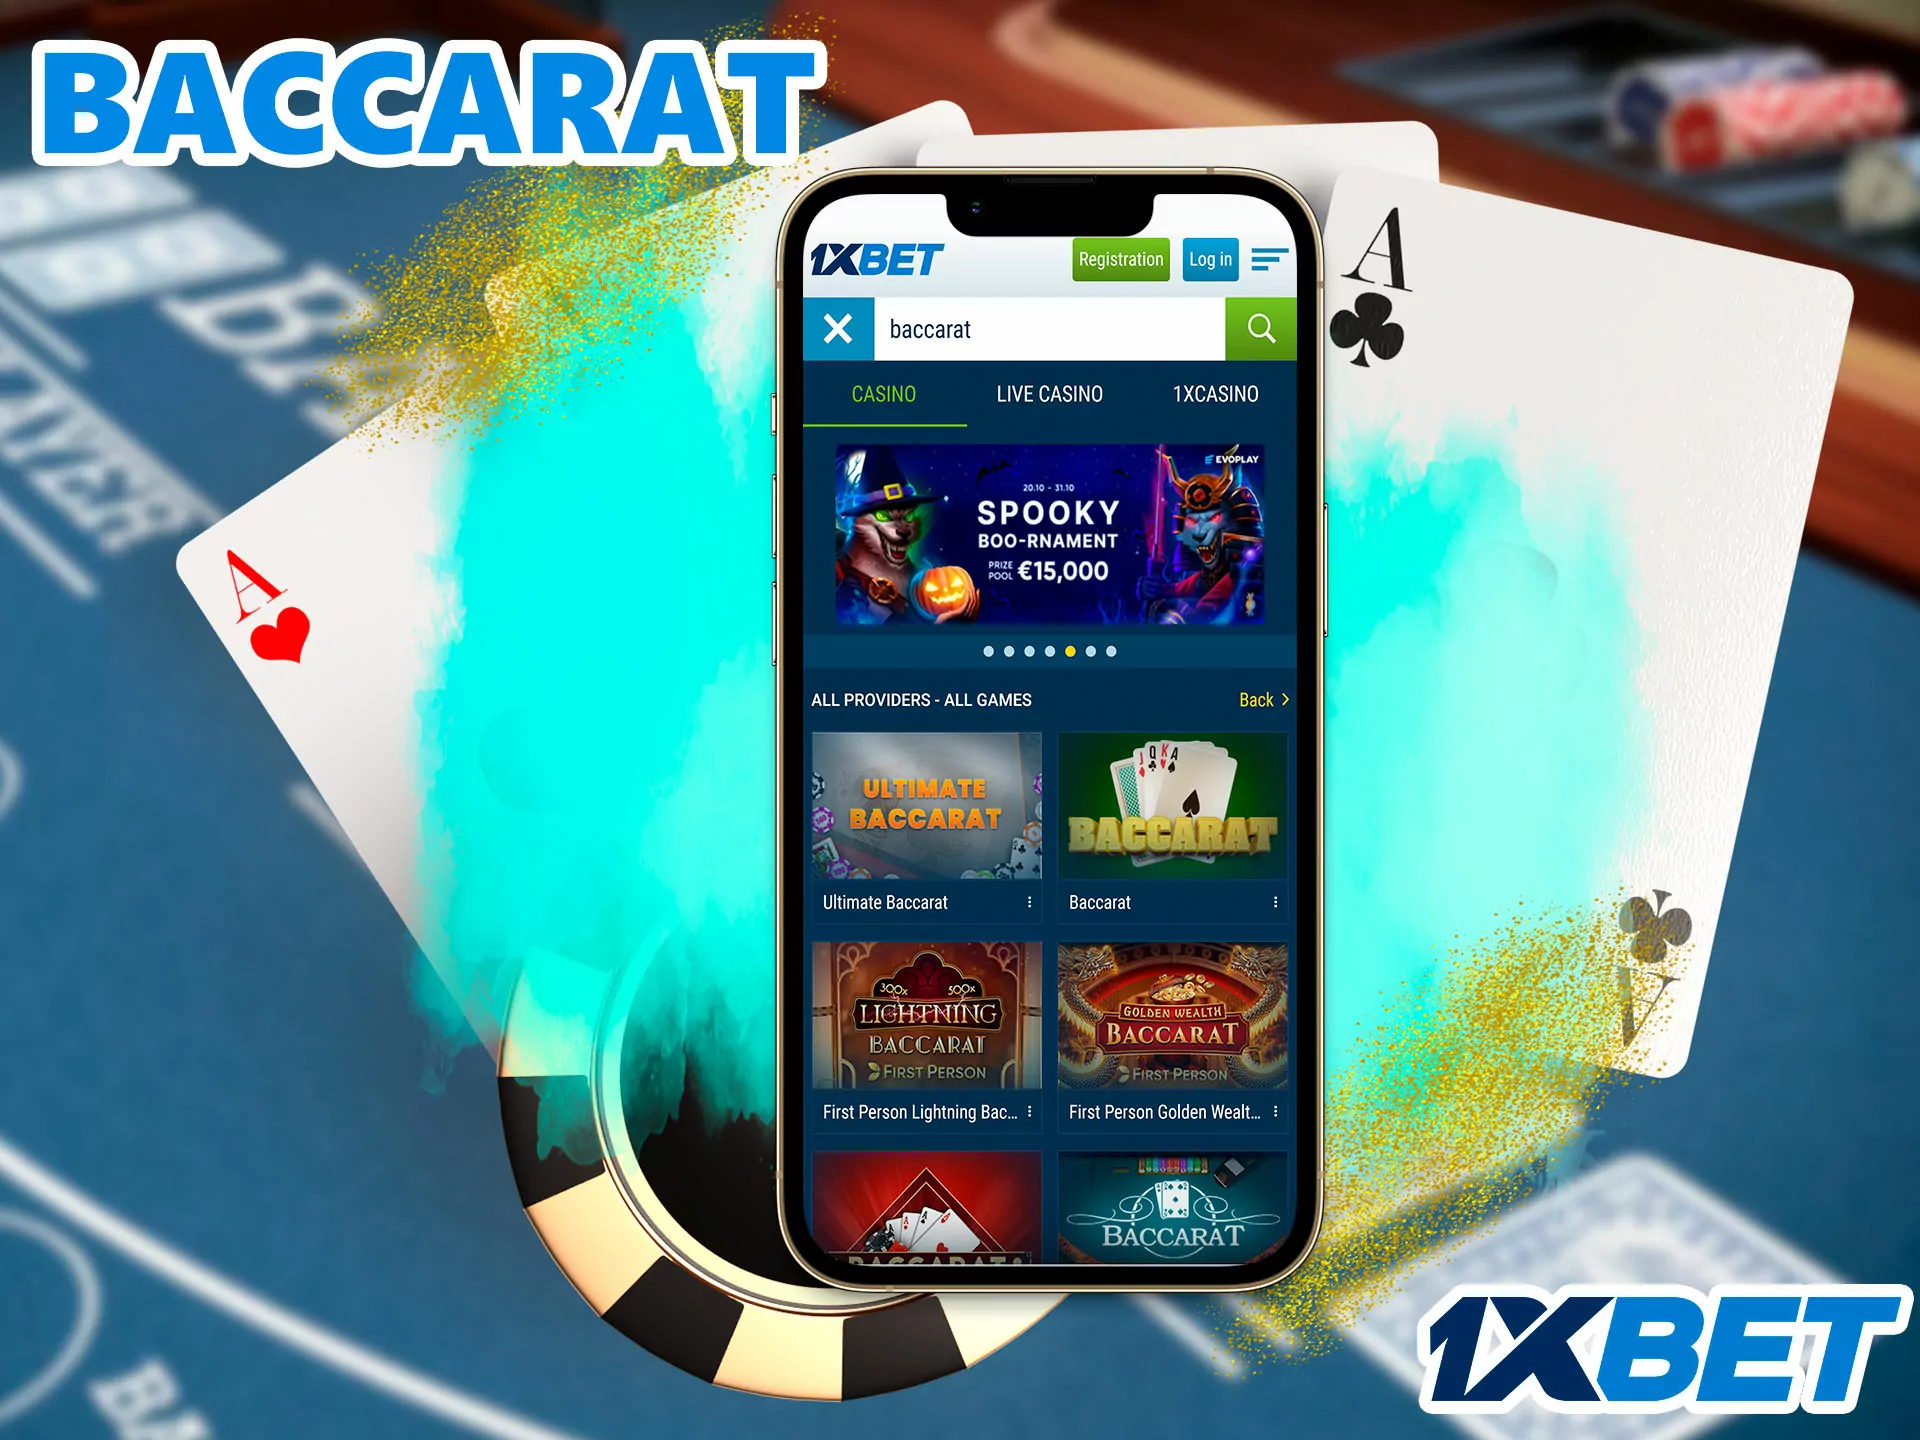 Collect a combination of cards as close as possible to 9 in 1xbet.